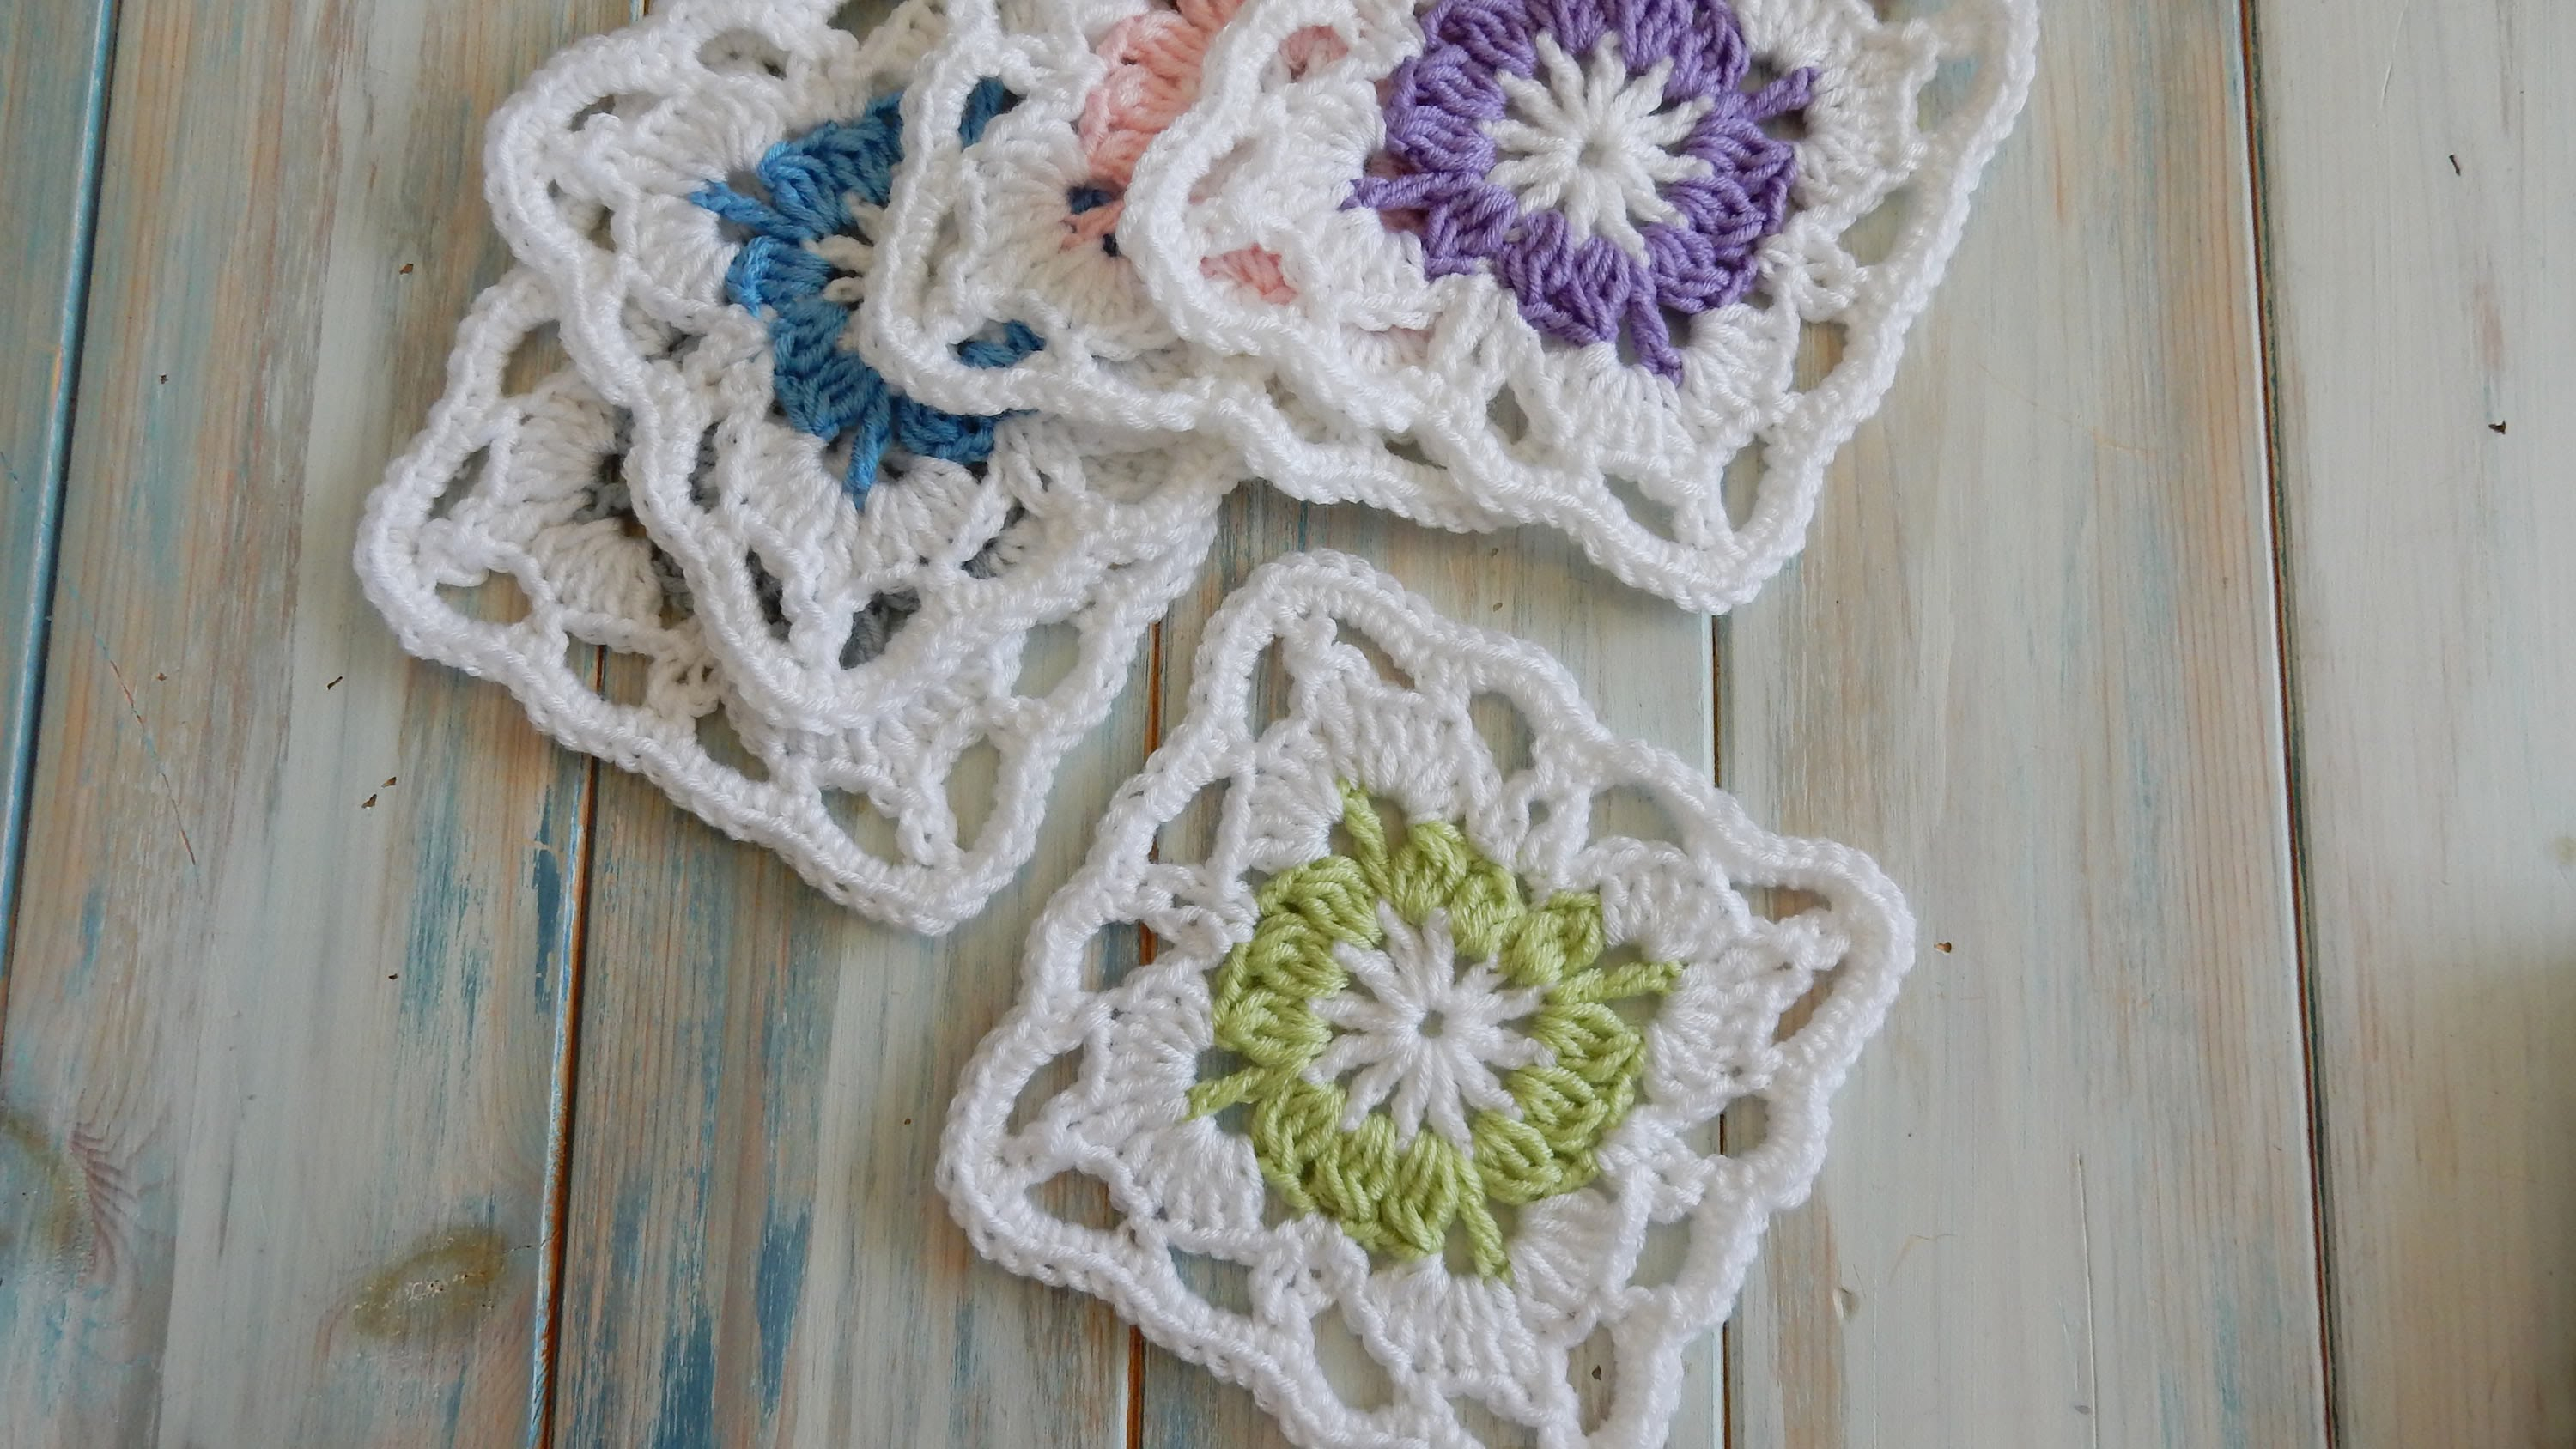 12 Granny Square Crochet Pattern Video Tutorial This Beautiful Vintage Granny Square Can Be Easily